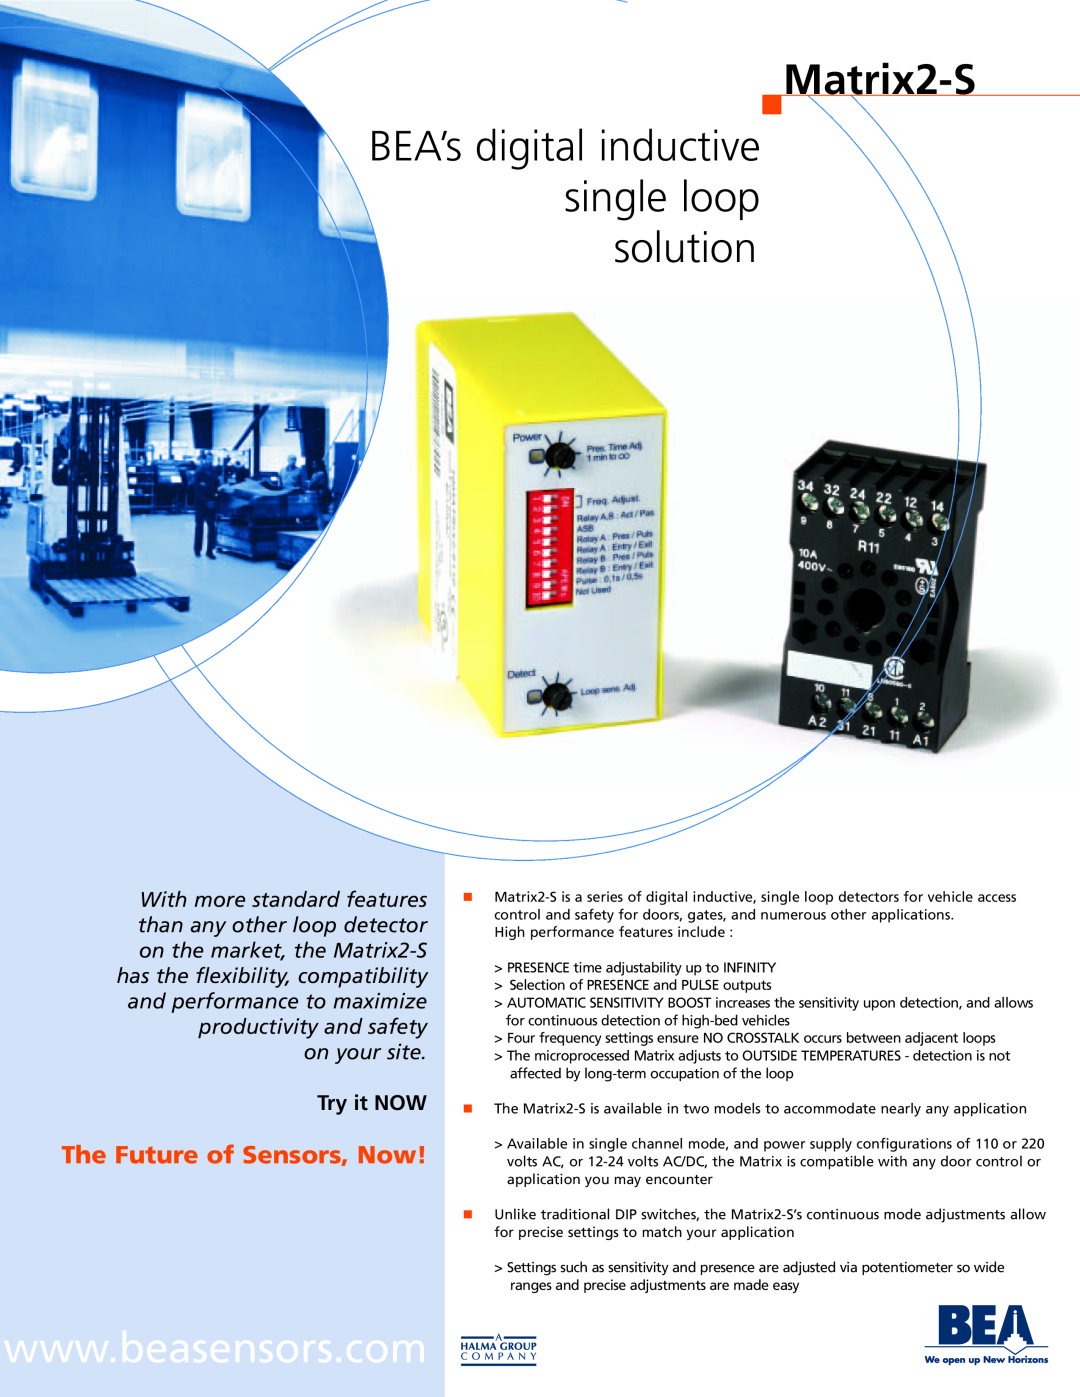 BEA Matrix2-S manual BEA’s digital inductive single loop solution, The Future of Sensors, Now, Try it NOW 